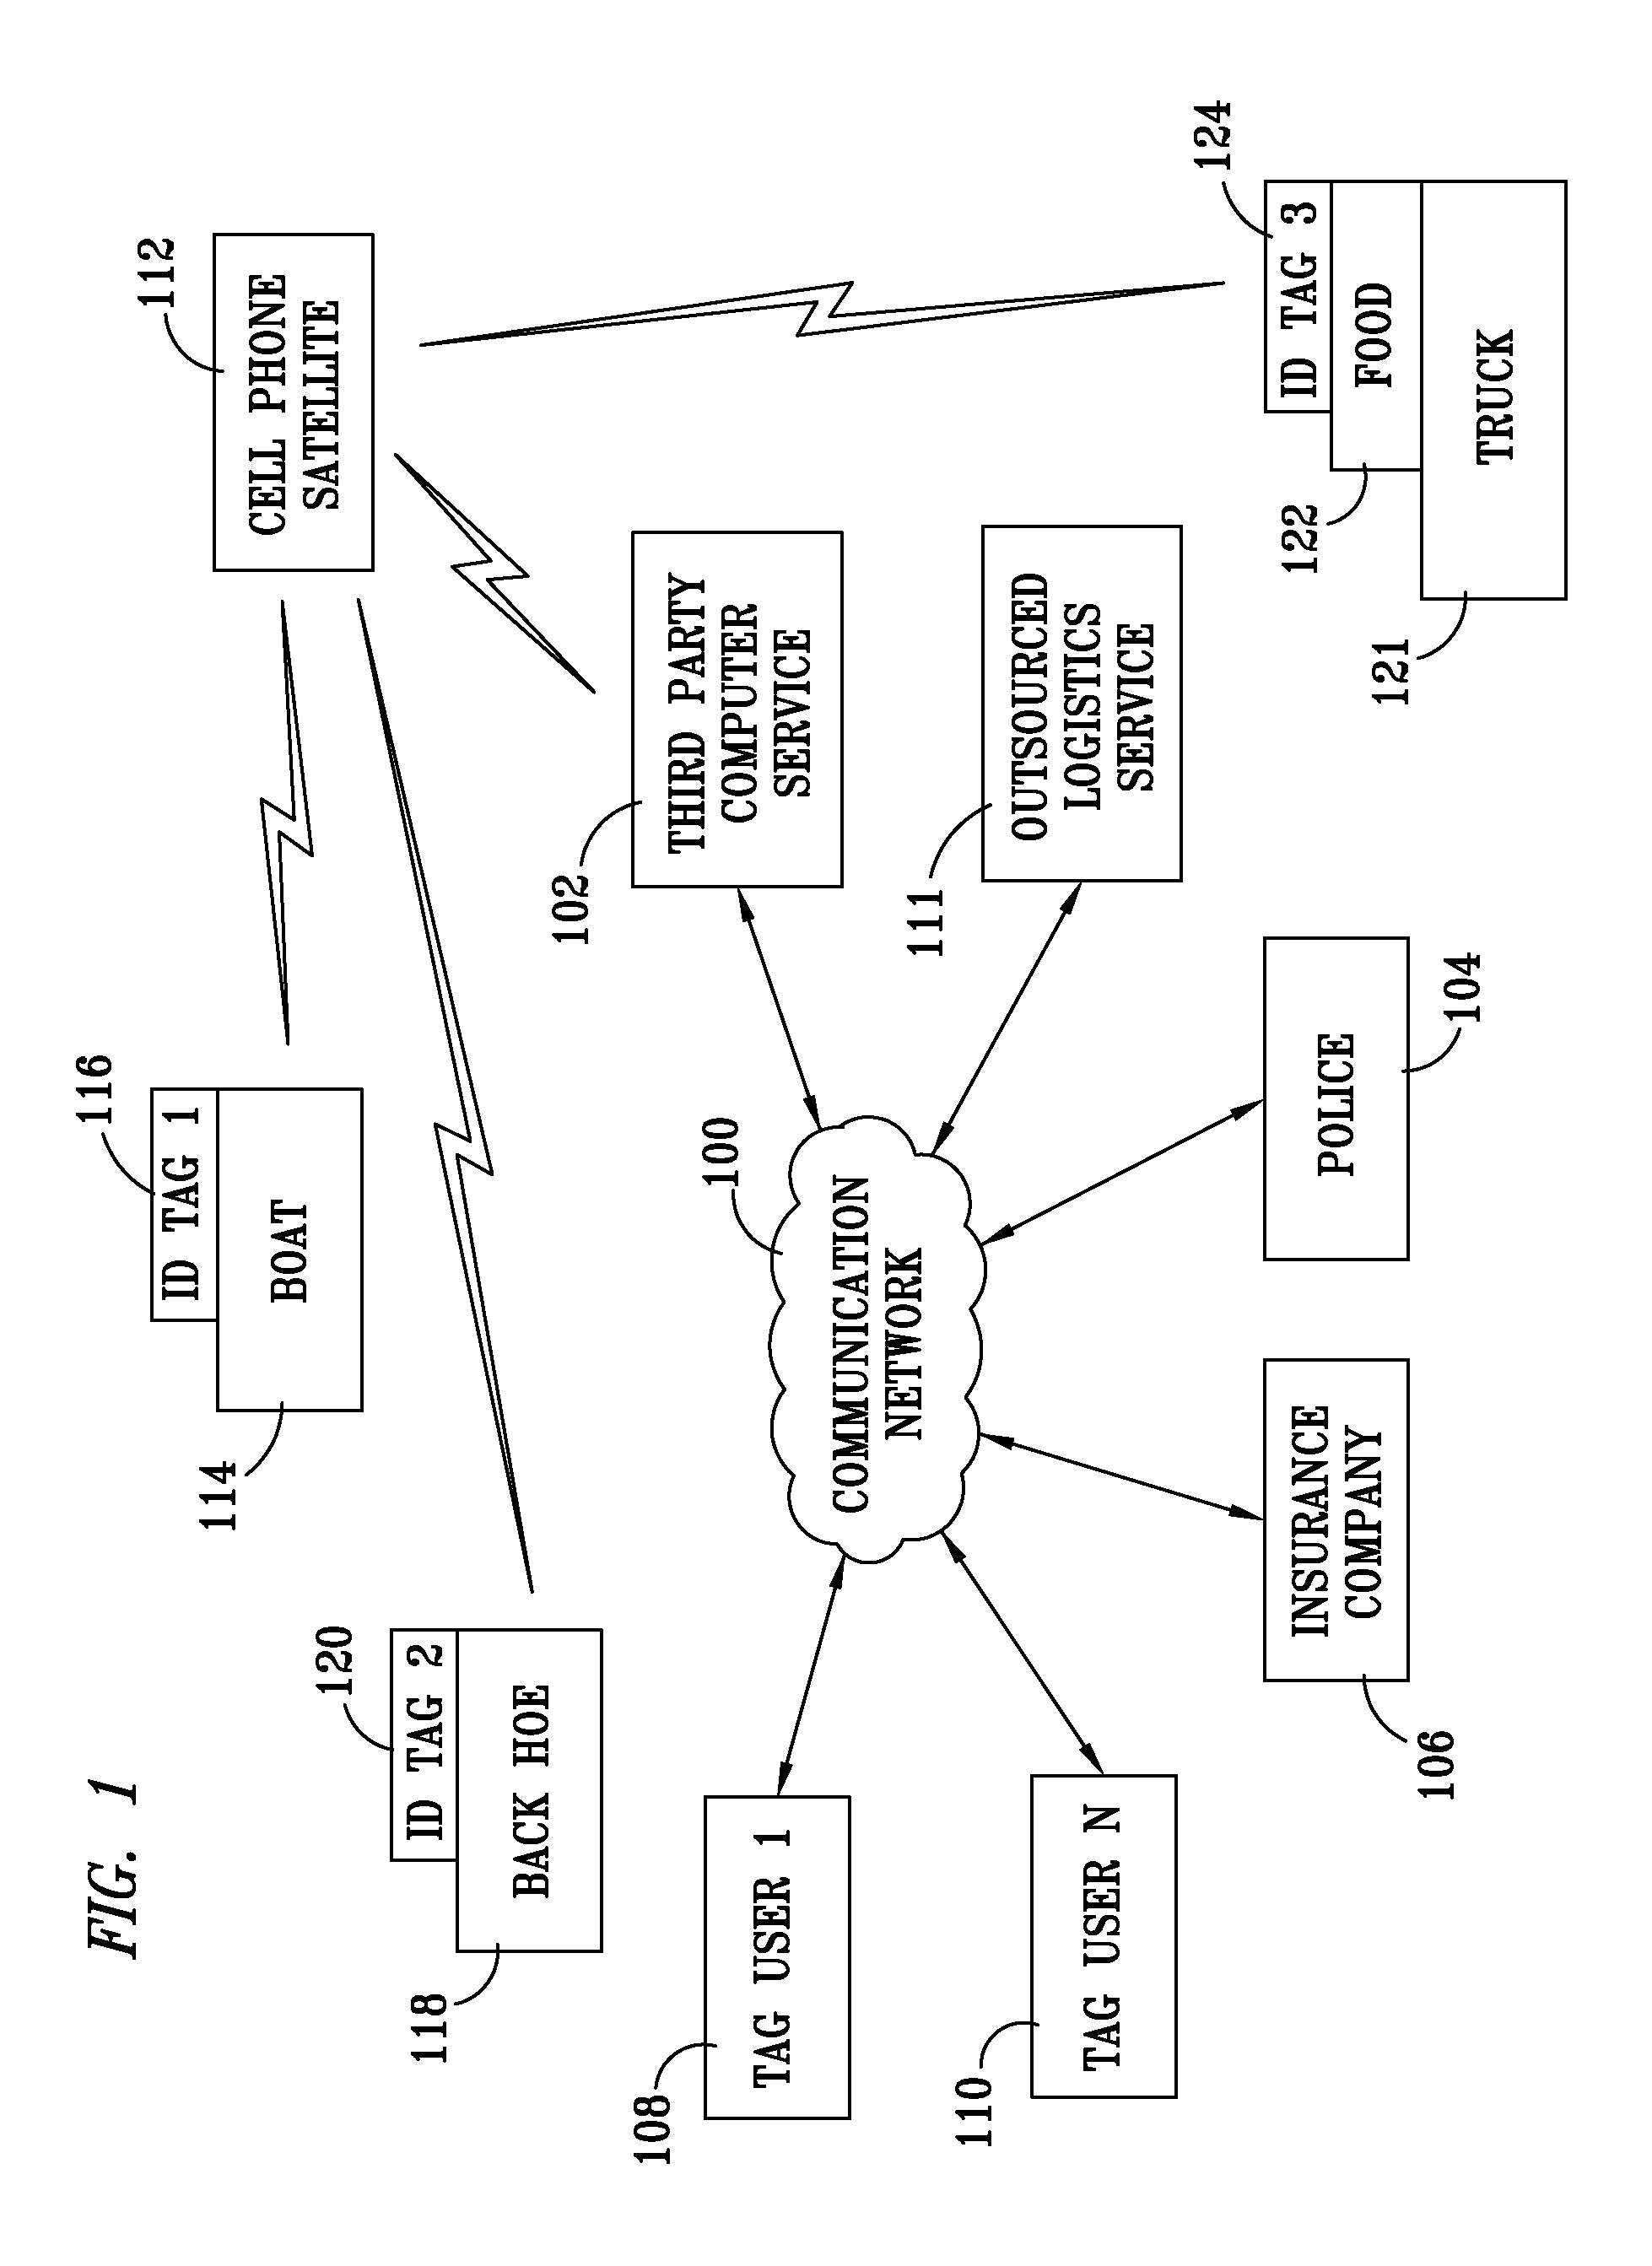 Method and apparatus for locating and/or otherwise monitoring an ID tagged asset's condition